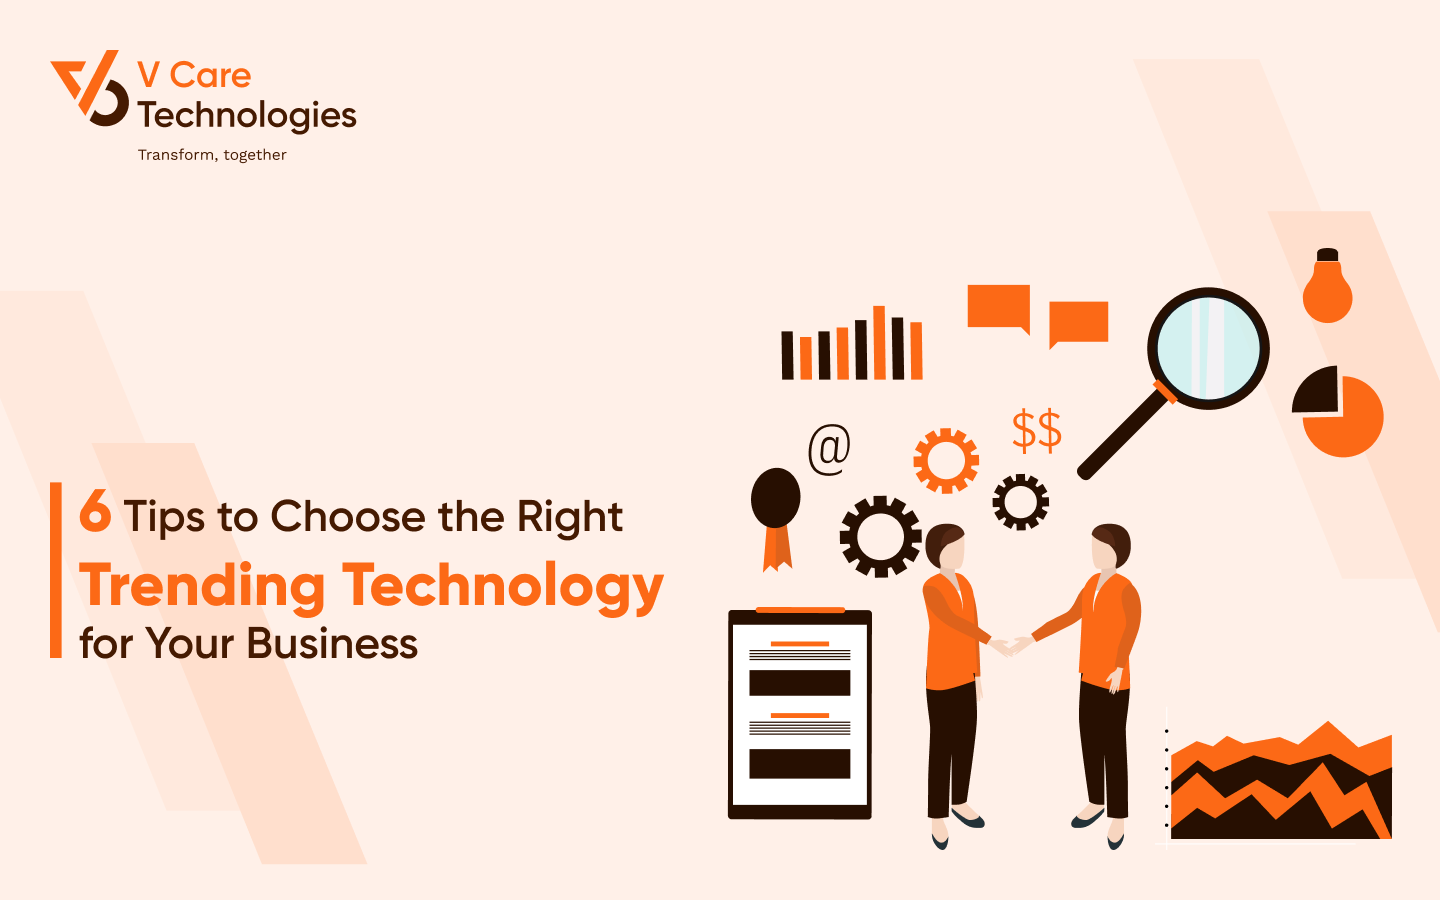  6 Tips to Choose the Right Trending Technology for Your Business